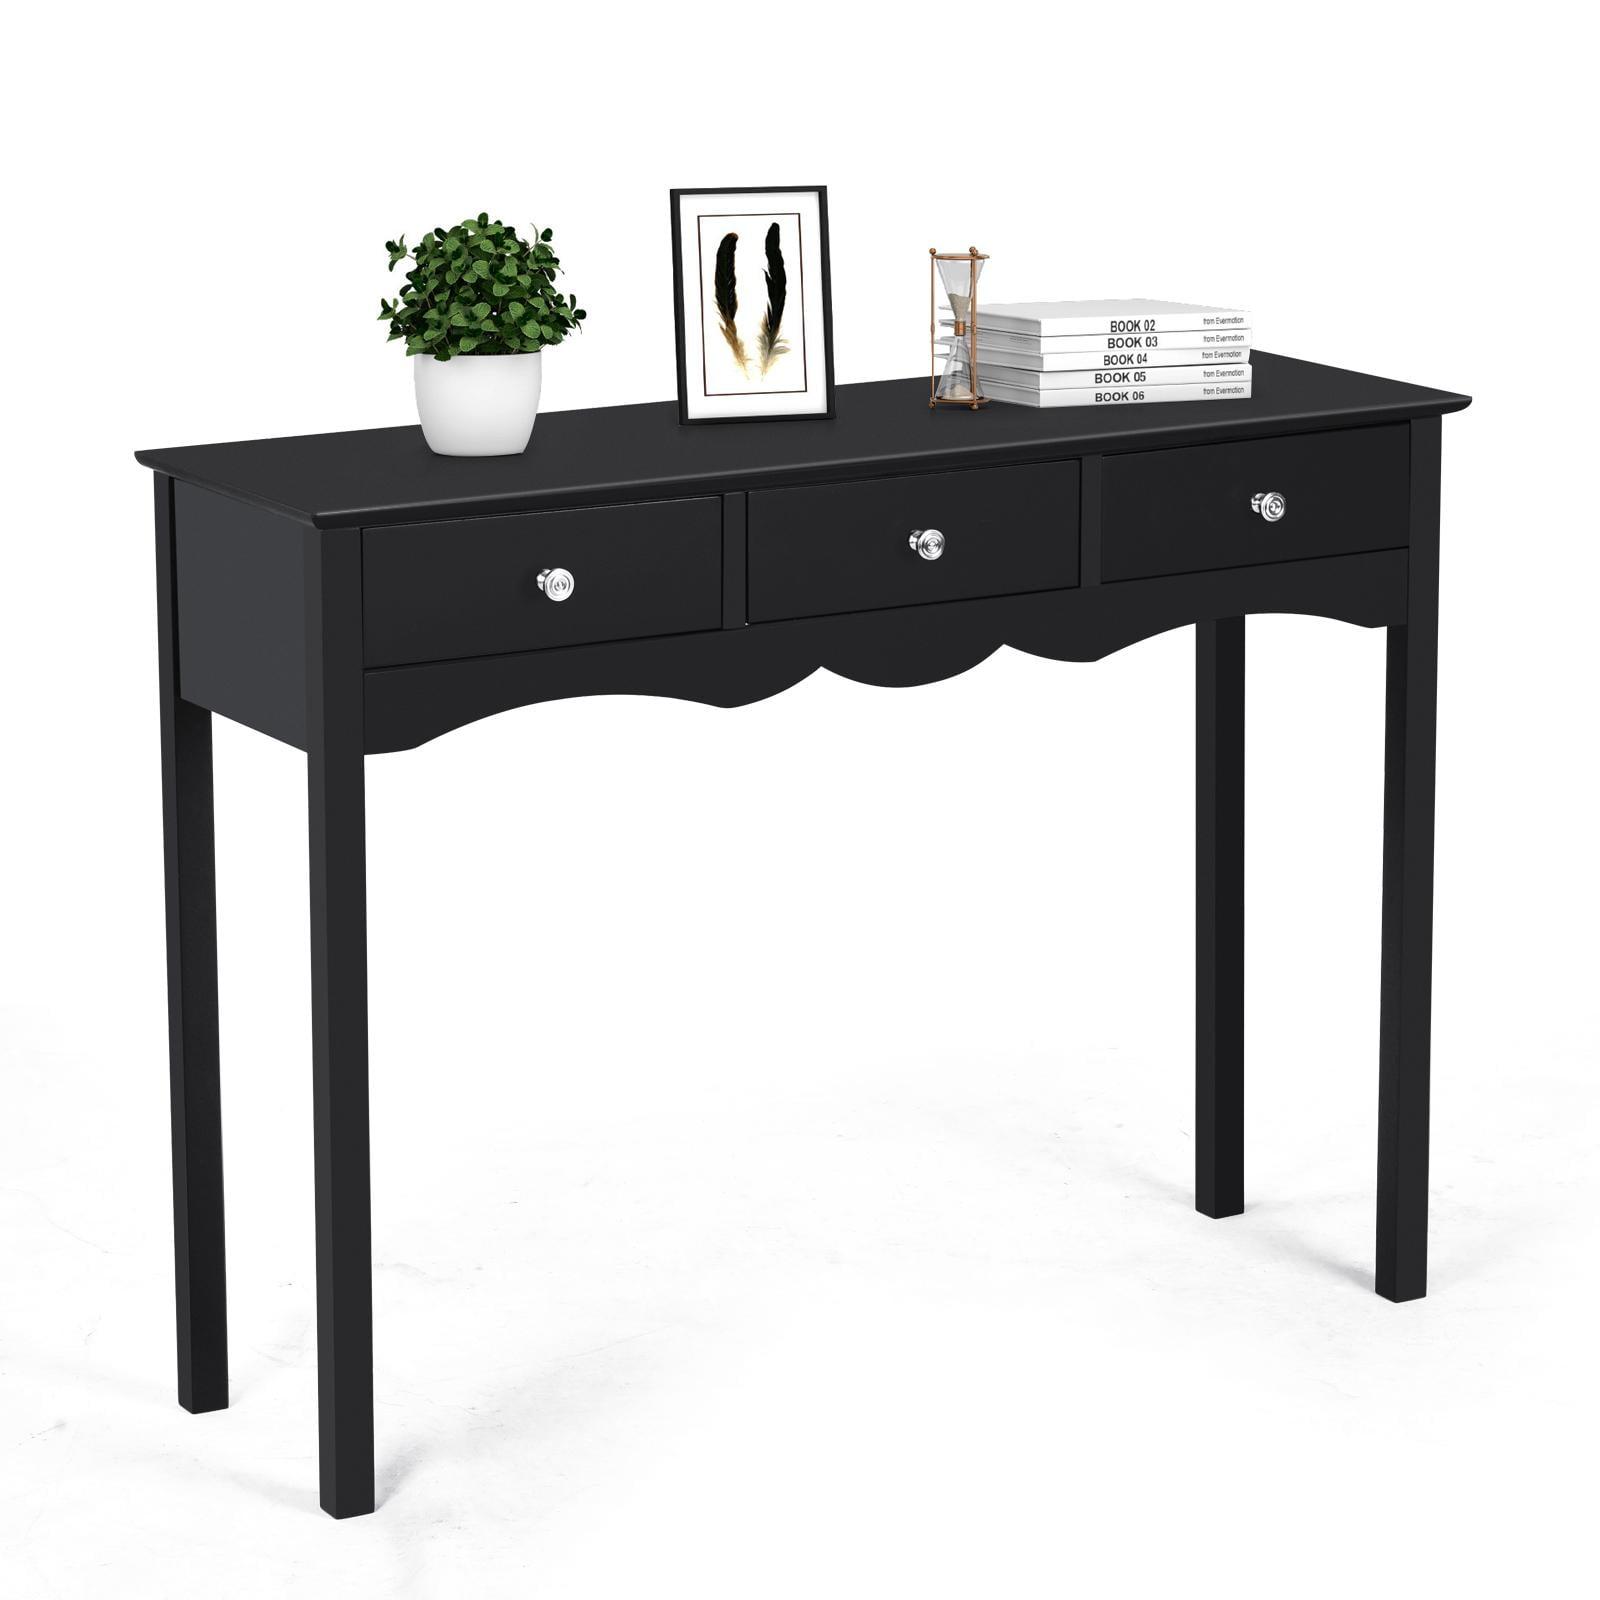 Elegant Black MDF Console Table with 3 Storage Drawers